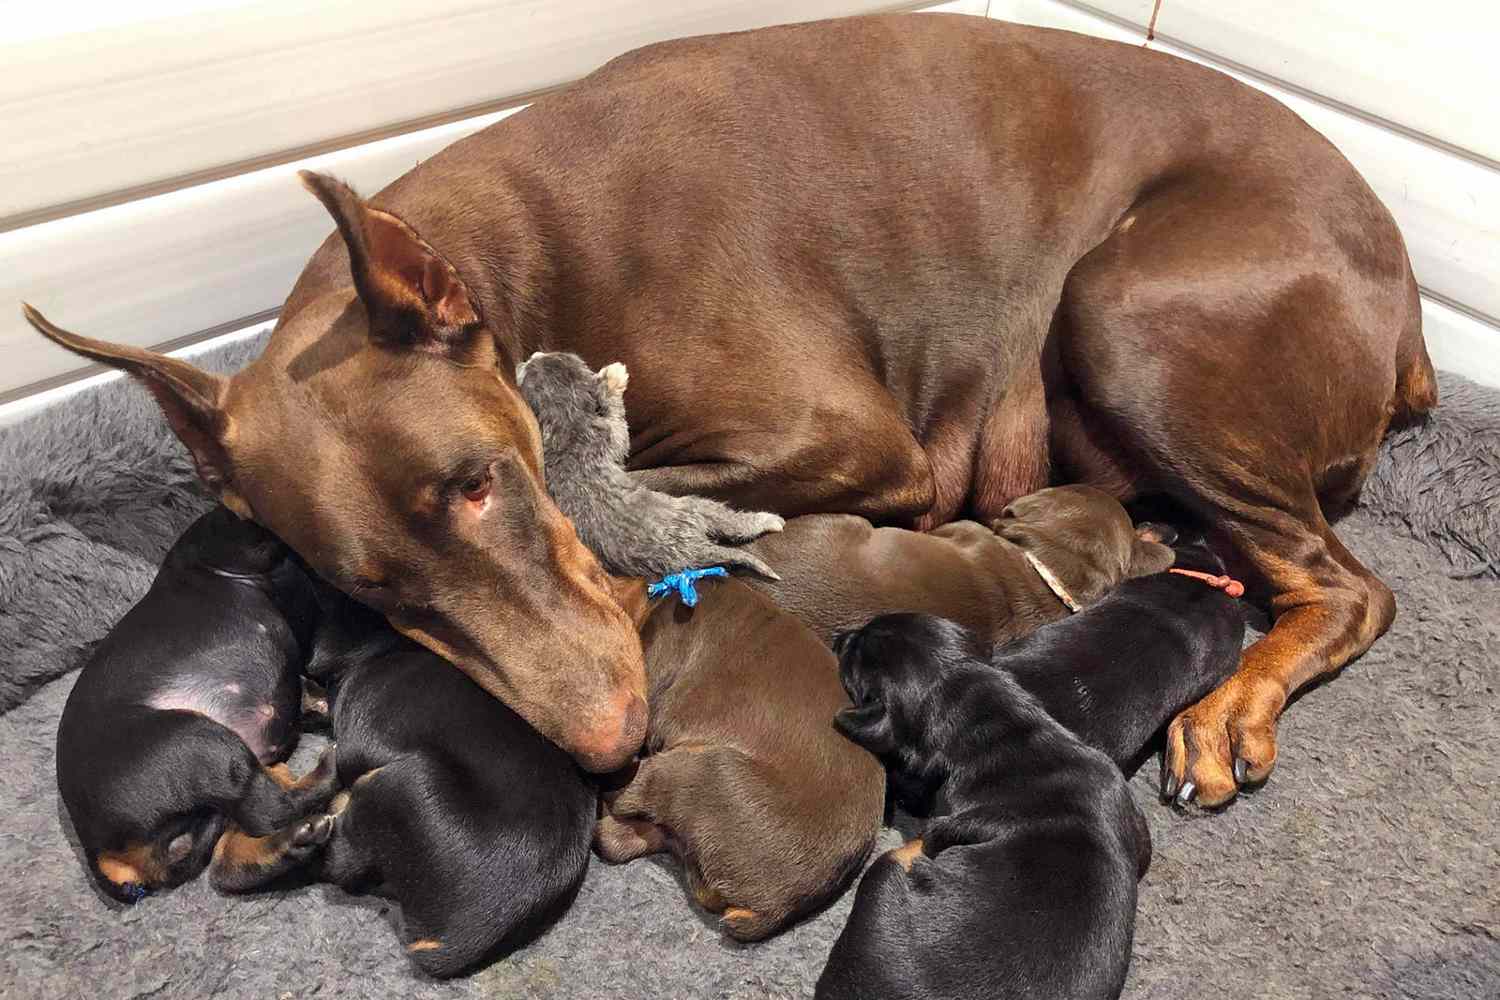 doberman dog mama snuggles with her litter as well as a stray newborn kitten and cares for it as her own